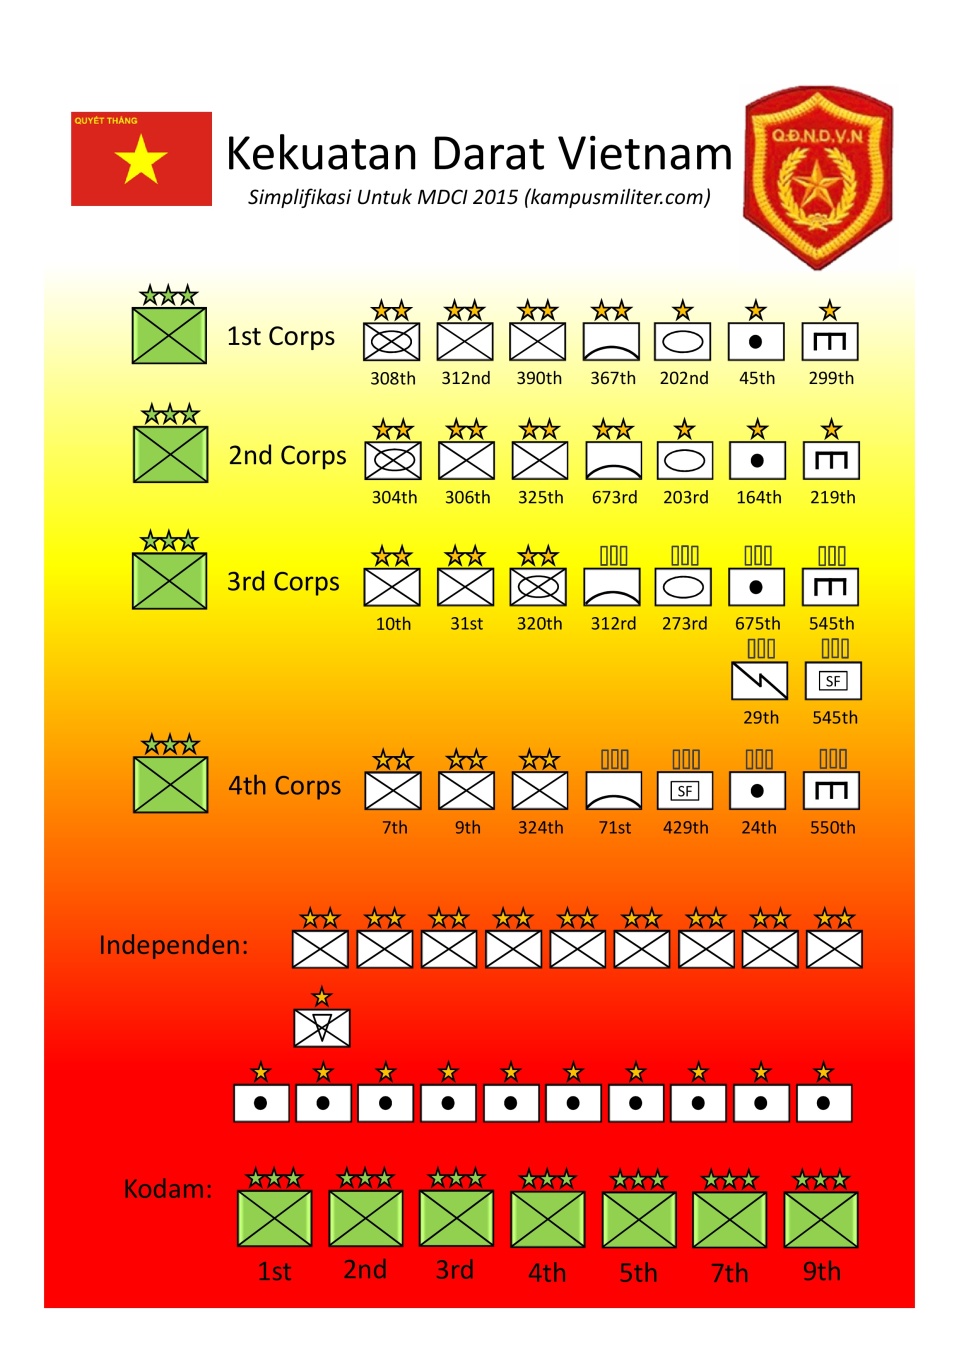 Vietnam Ground Forces Order of Battle, simplified for MDCI 2015